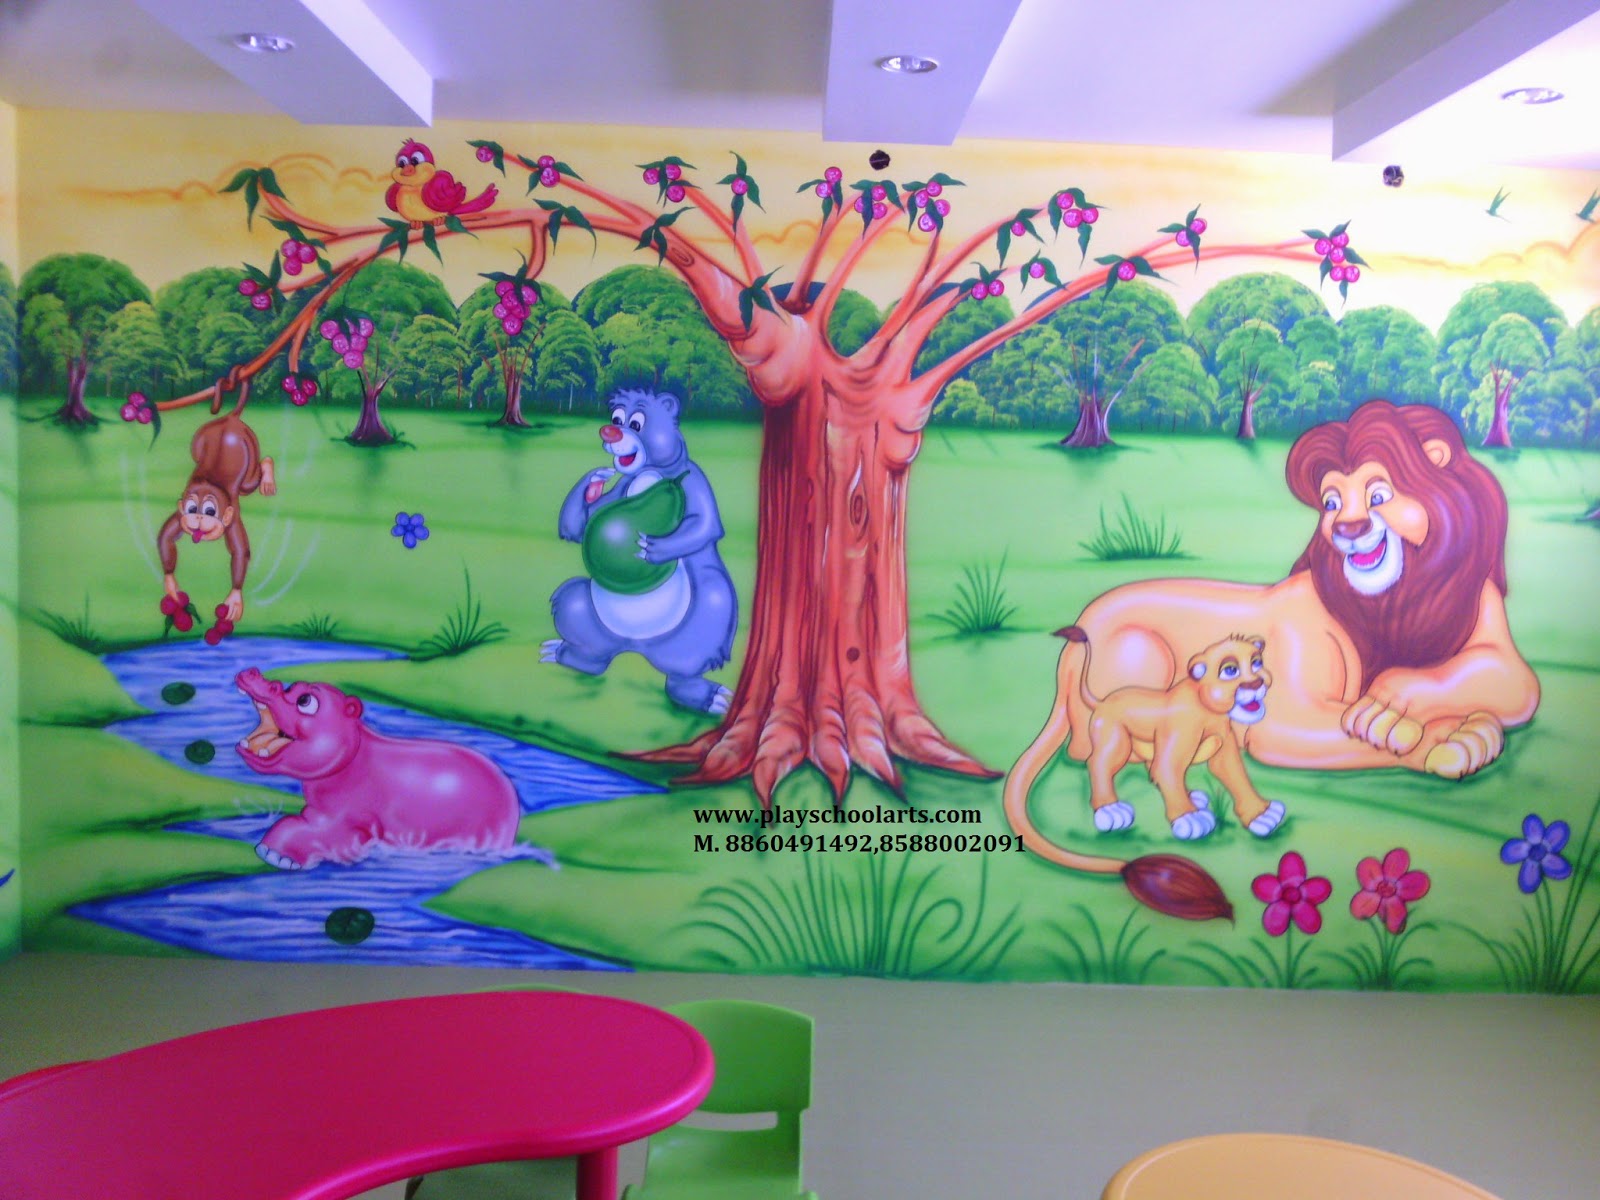 PLAY SCHOOL WALL PAINTING / 3D WALL PAINTING / CARTOON PAINTING / KIDS ROOM  PAINTING / 3D THEME PAIN: JUNGLE THEME PAINTING IN THE CLASS ROOM